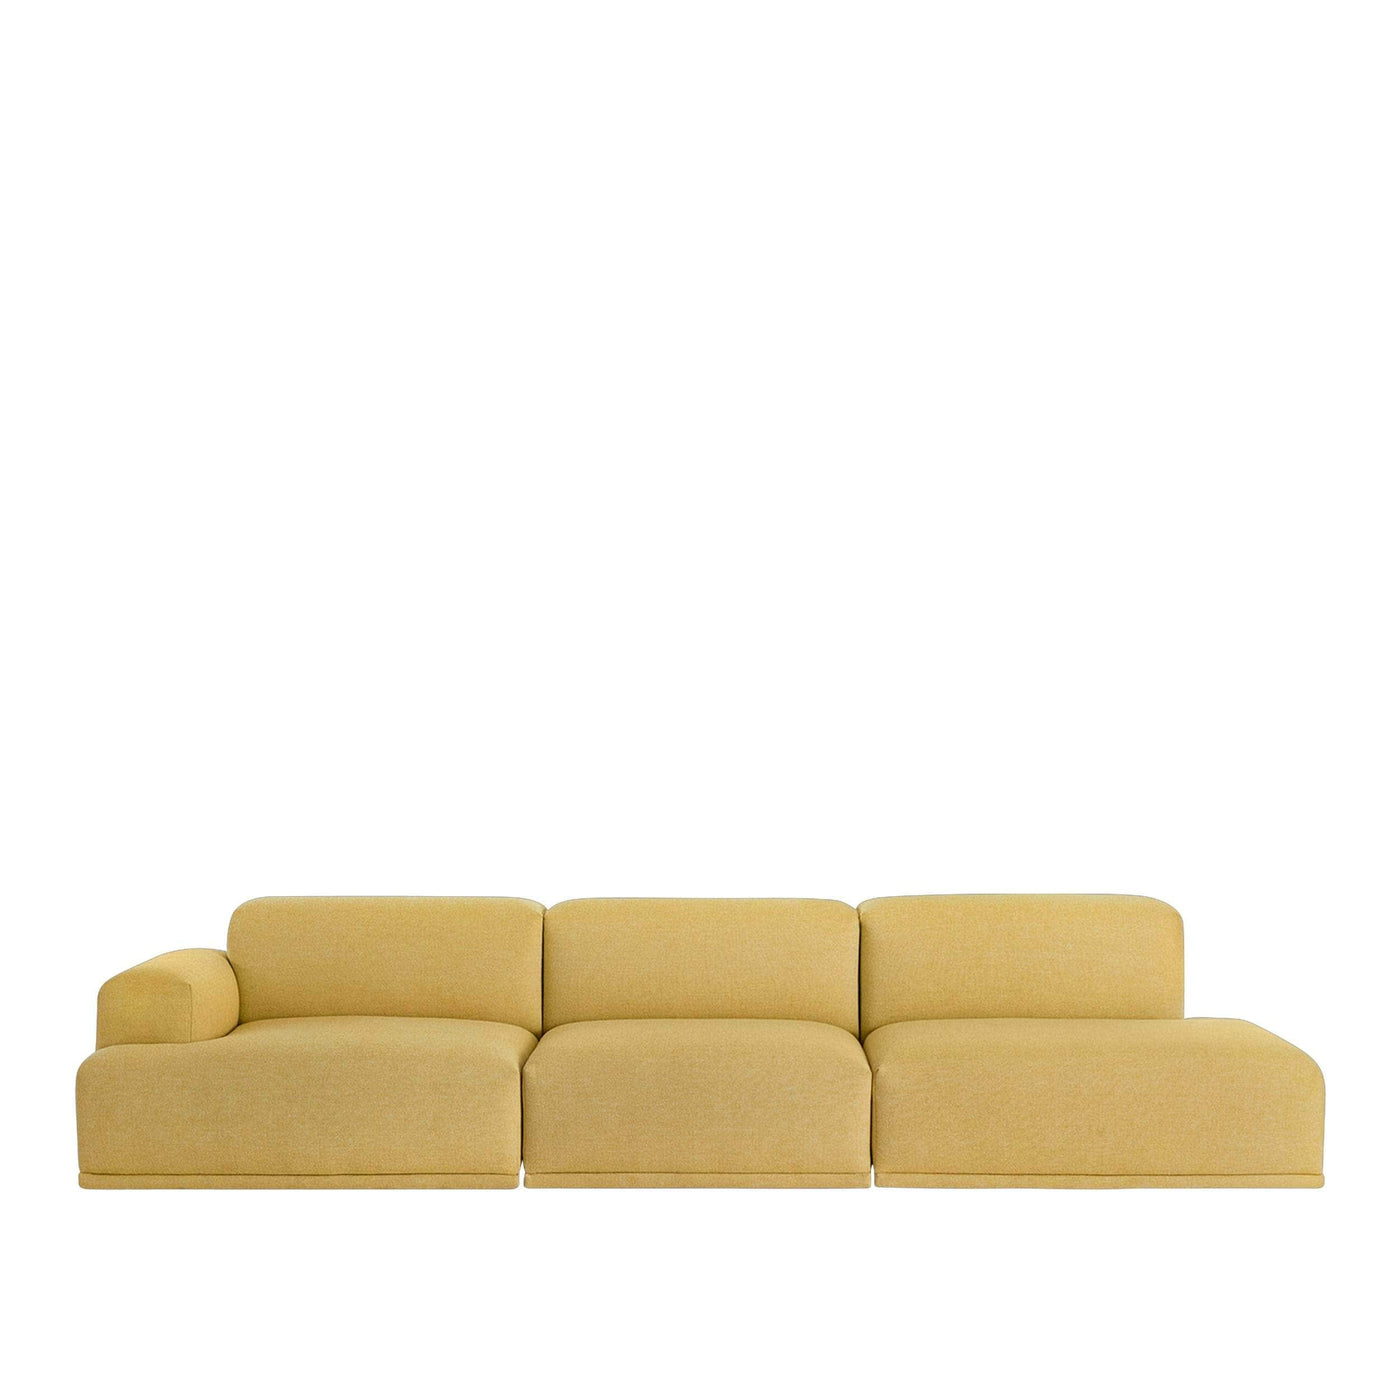 Hallingdal 407 by Kvadrat. Yellow upholstery fabric made to order for Muuto Outline & Connect sofas. Order free fabric swatches at someday designs.